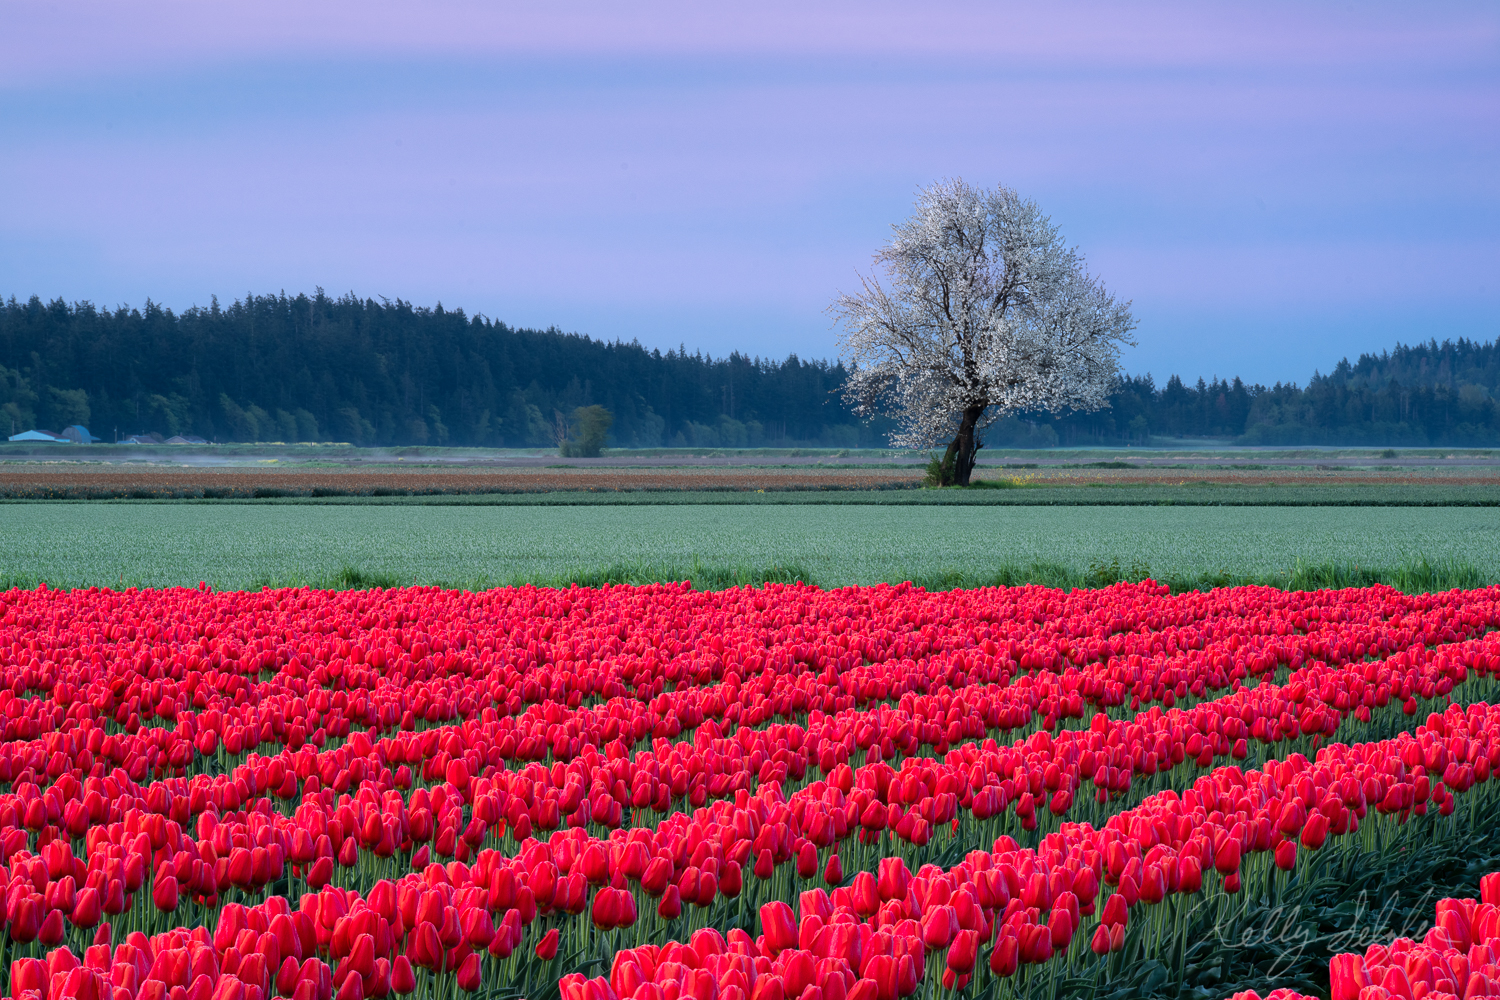 As the sun was rising in the tulip fields of Skagit Valley, the sky turned a beautiful haze of pink/purple.